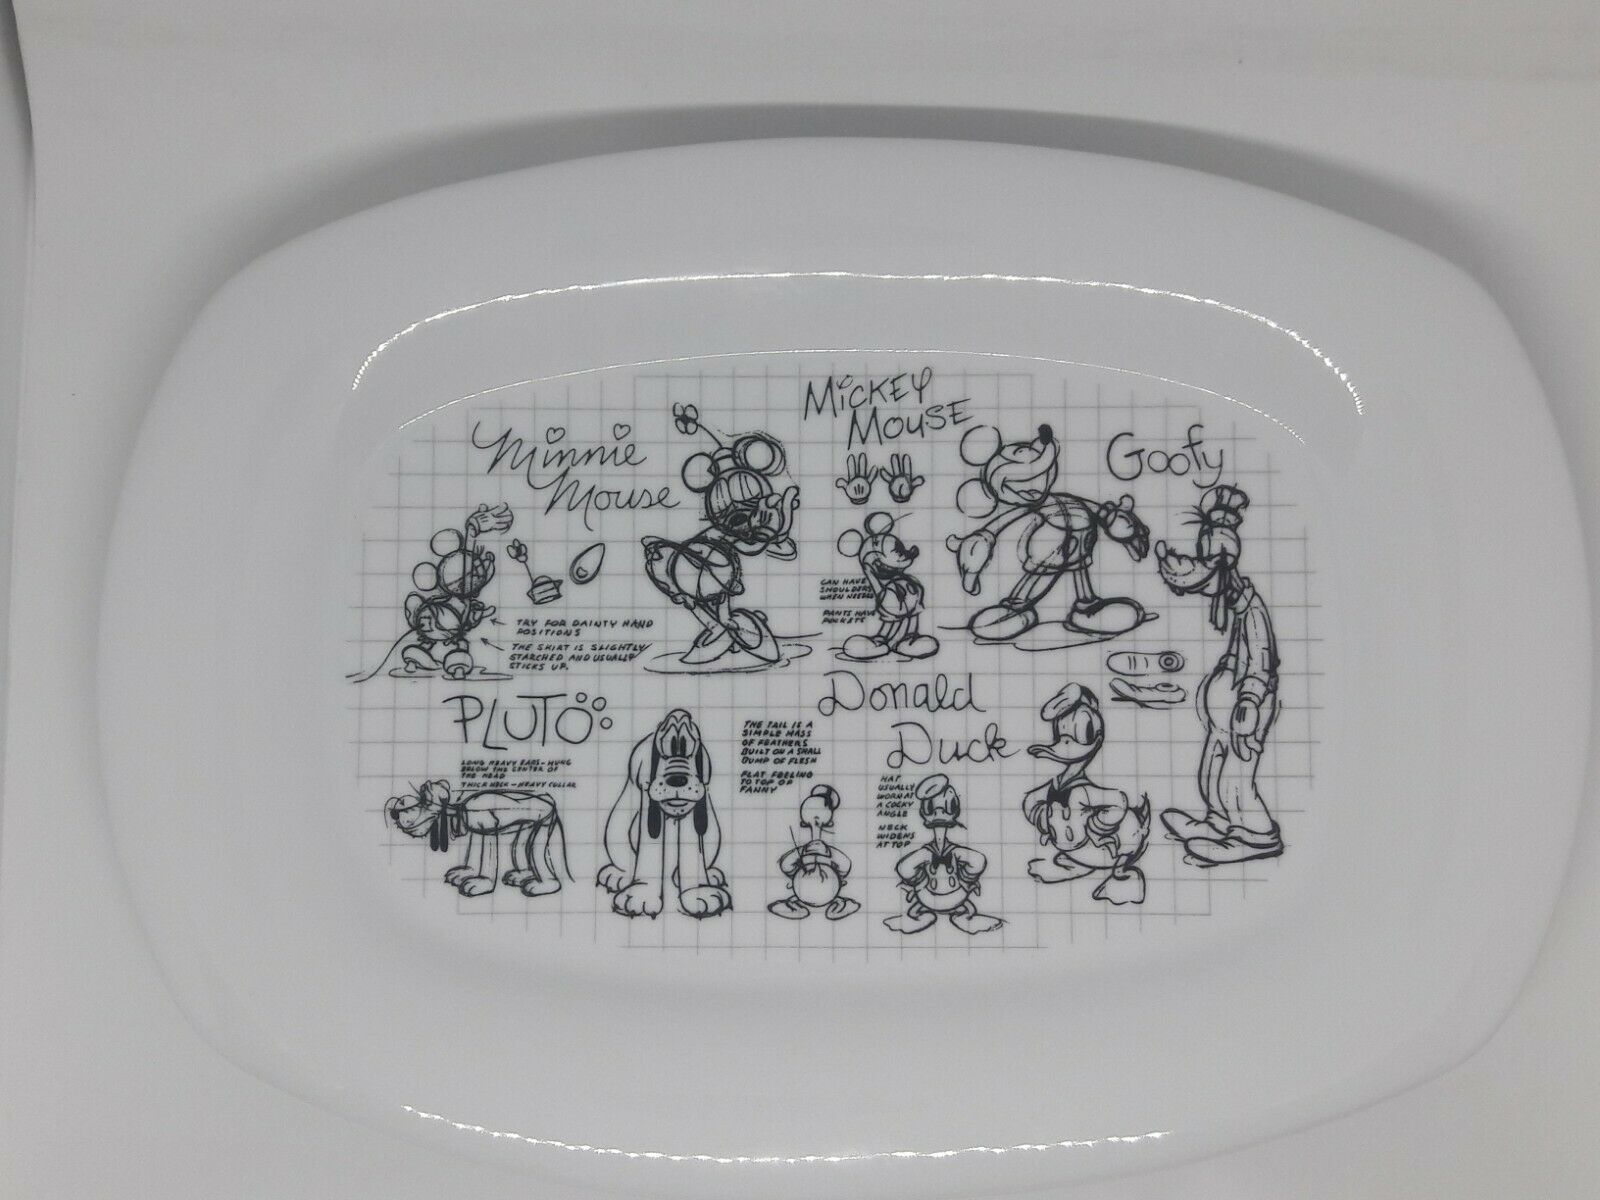 Disney Sketchbook Serving Tray Mickey Mouse & Friends Sketch Plate 13.5” - $33.35